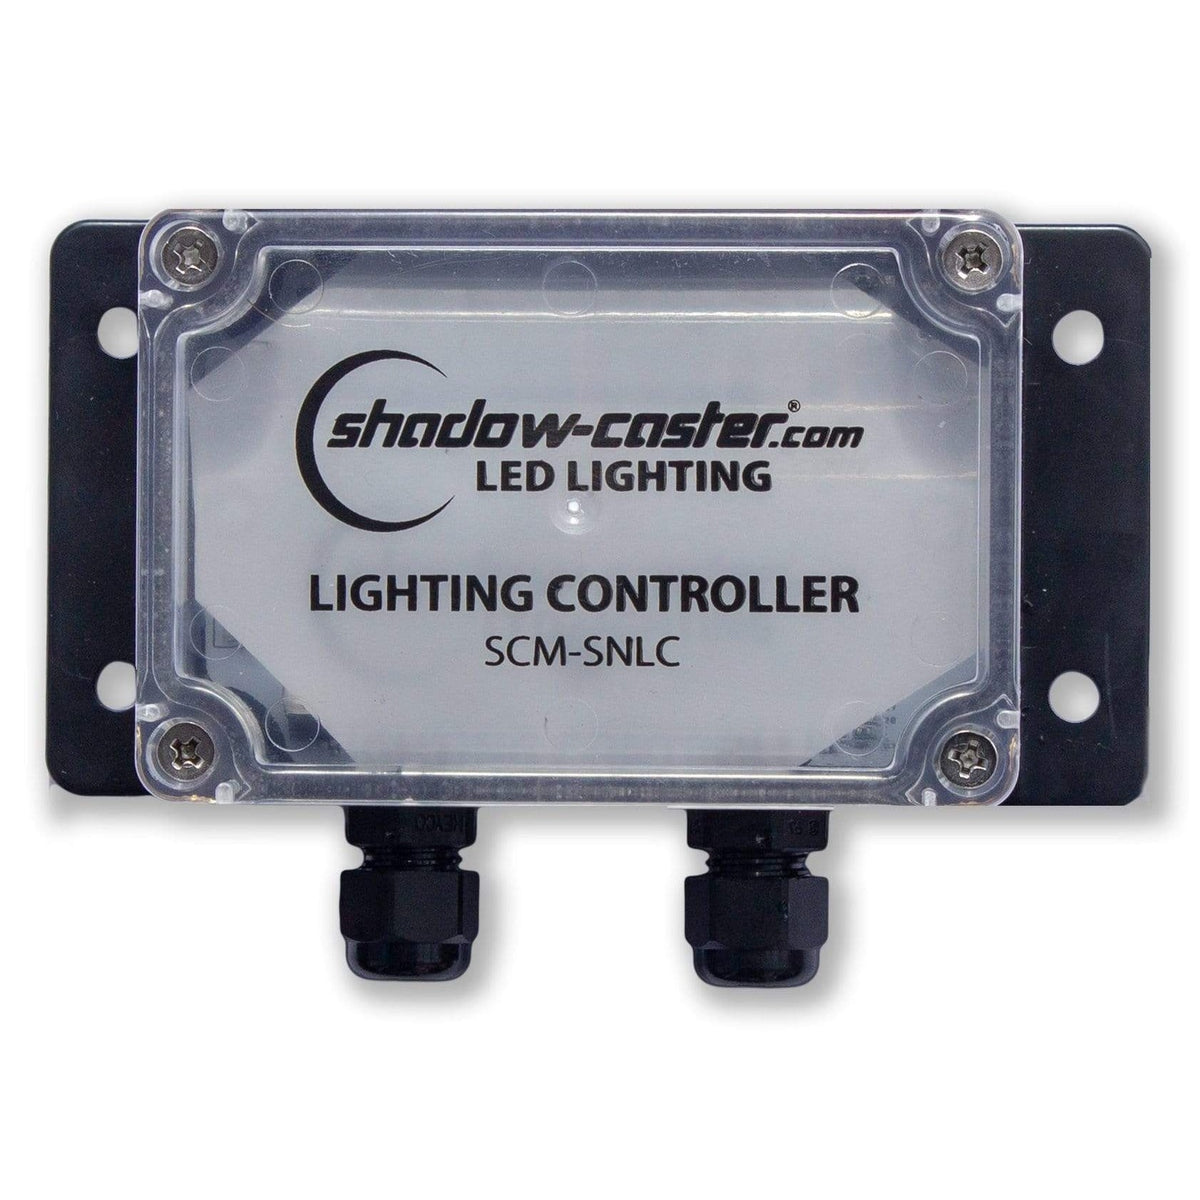 Shadow Caster Qualifies for Free Shipping Shadow Caster SCMSNLC Single Zone Lighting Controller #SCM-SNLC